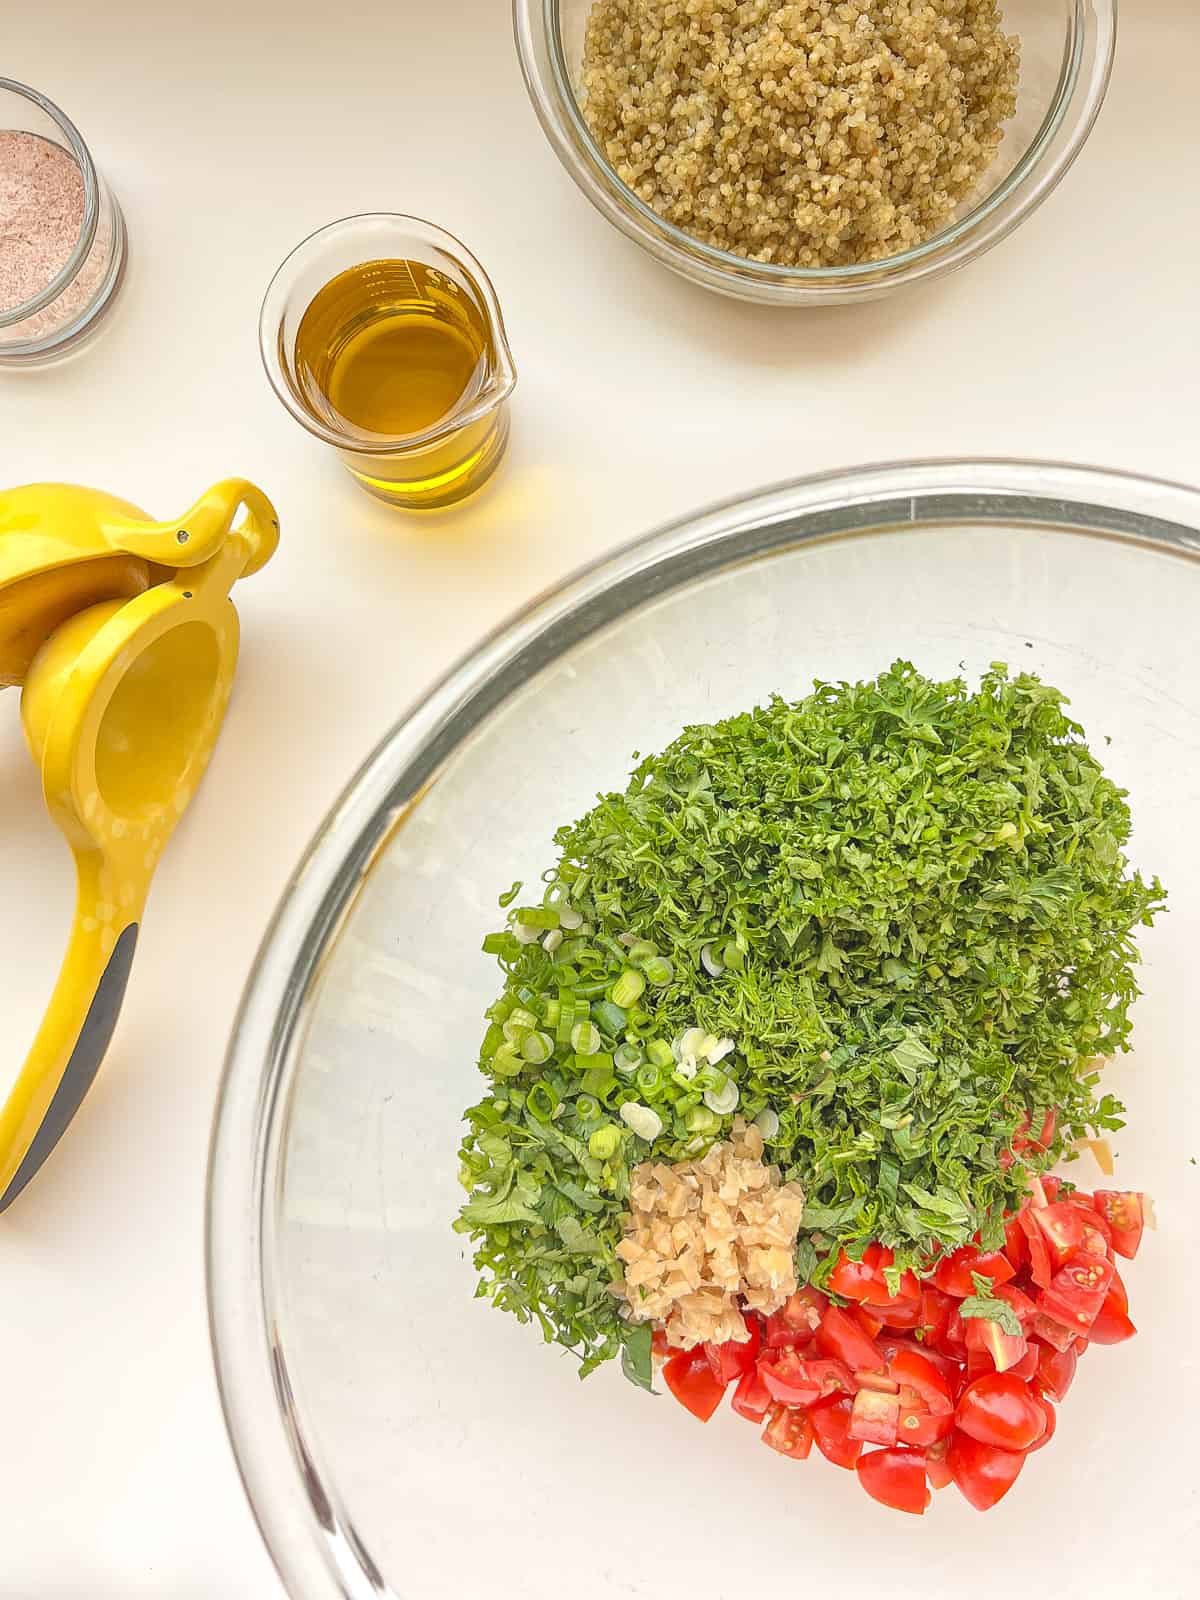 The ingredients for tabbouleh in a glass mixing bowl.